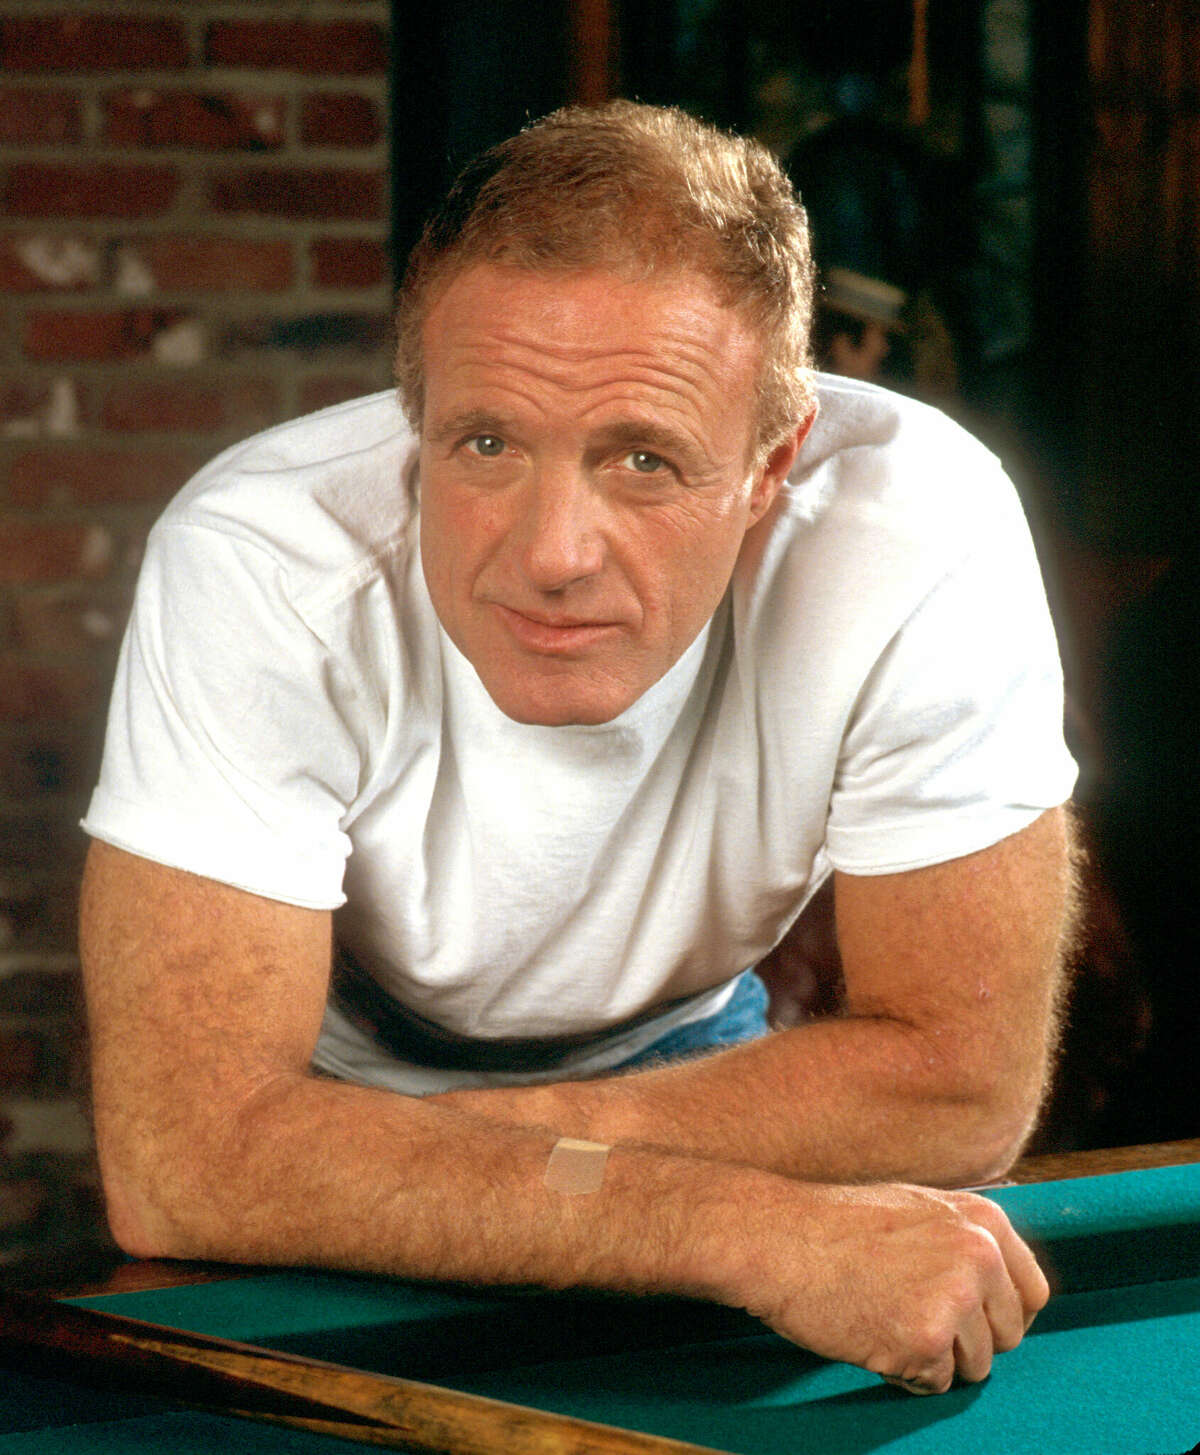 File photo of actor James Caan at his home in Los Angeles, Calif. on 9/29/88. (Photo by Bob Riha Jr/WireImage)